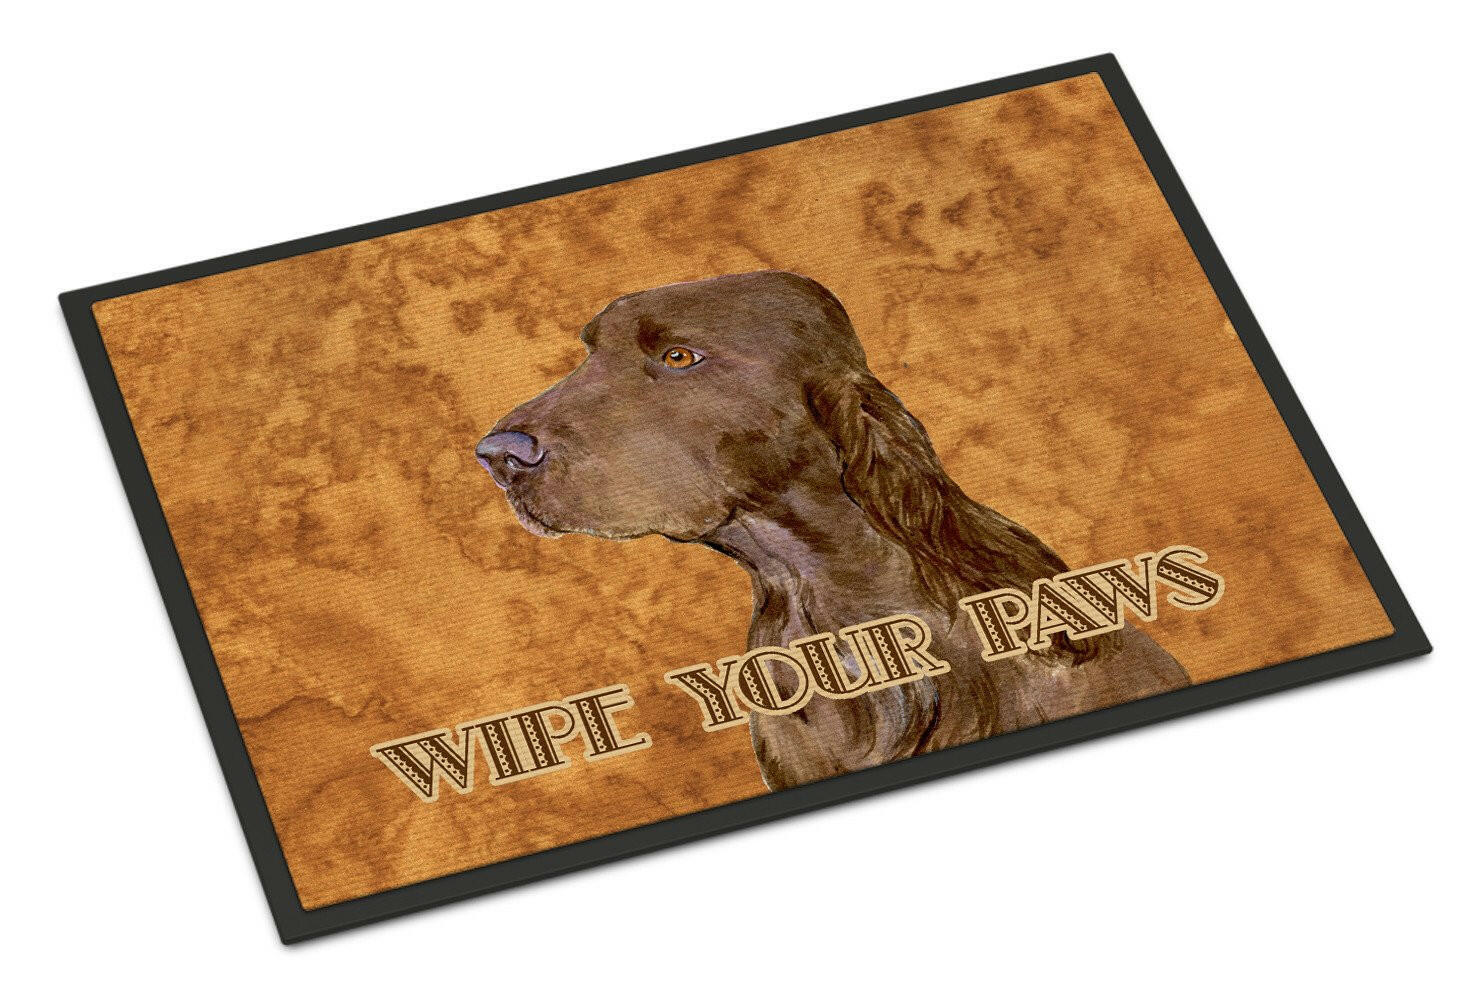 Field Spaniel Wipe your Paws Indoor or Outdoor Mat 24x36 SS4879JMAT - the-store.com